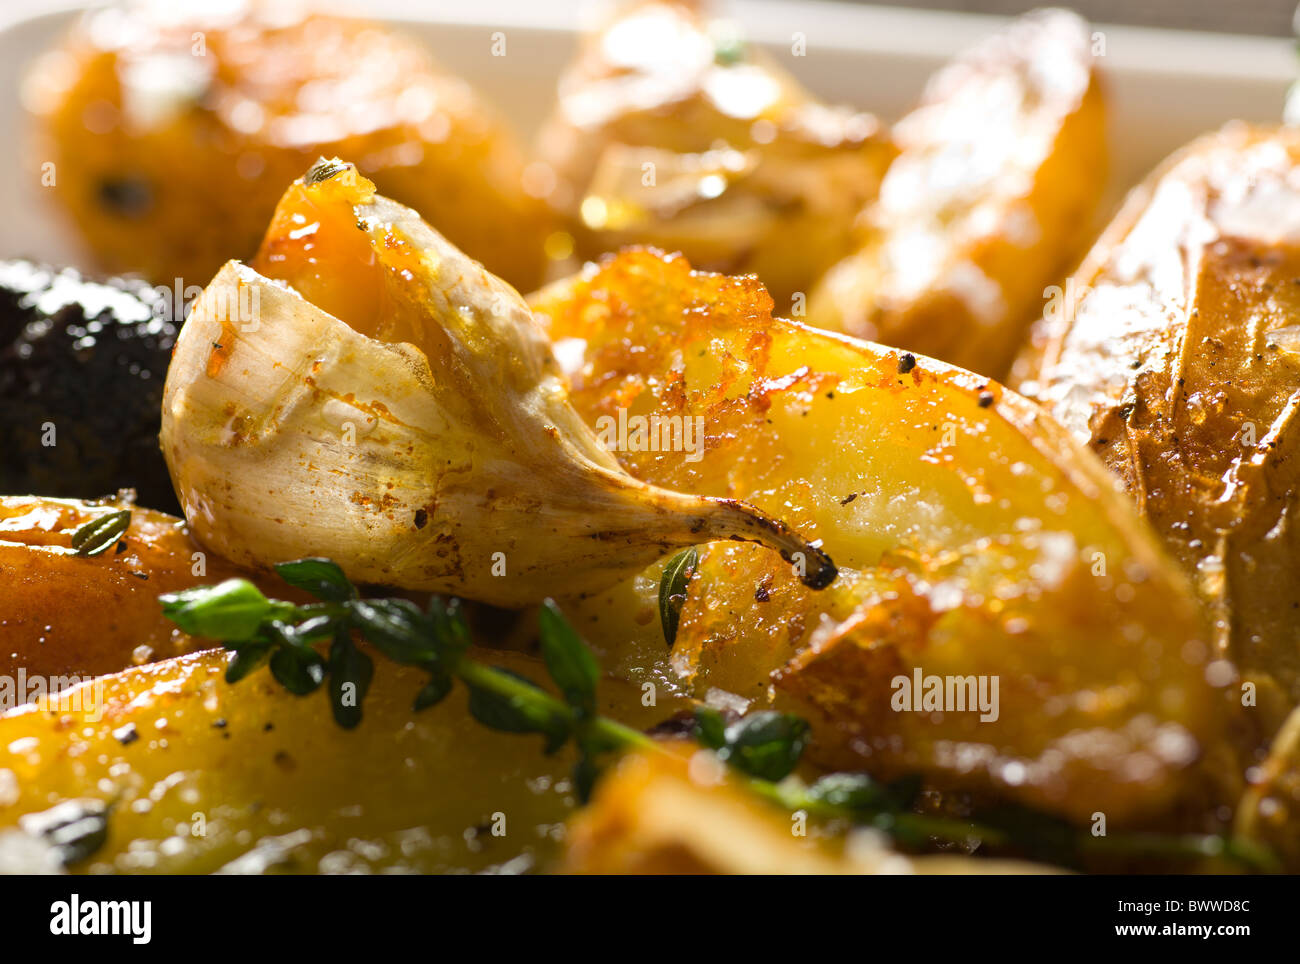 Roasted Fingerling Potatoes with Dried Figs, Garlic Cloves and Thyme. Stock Photo